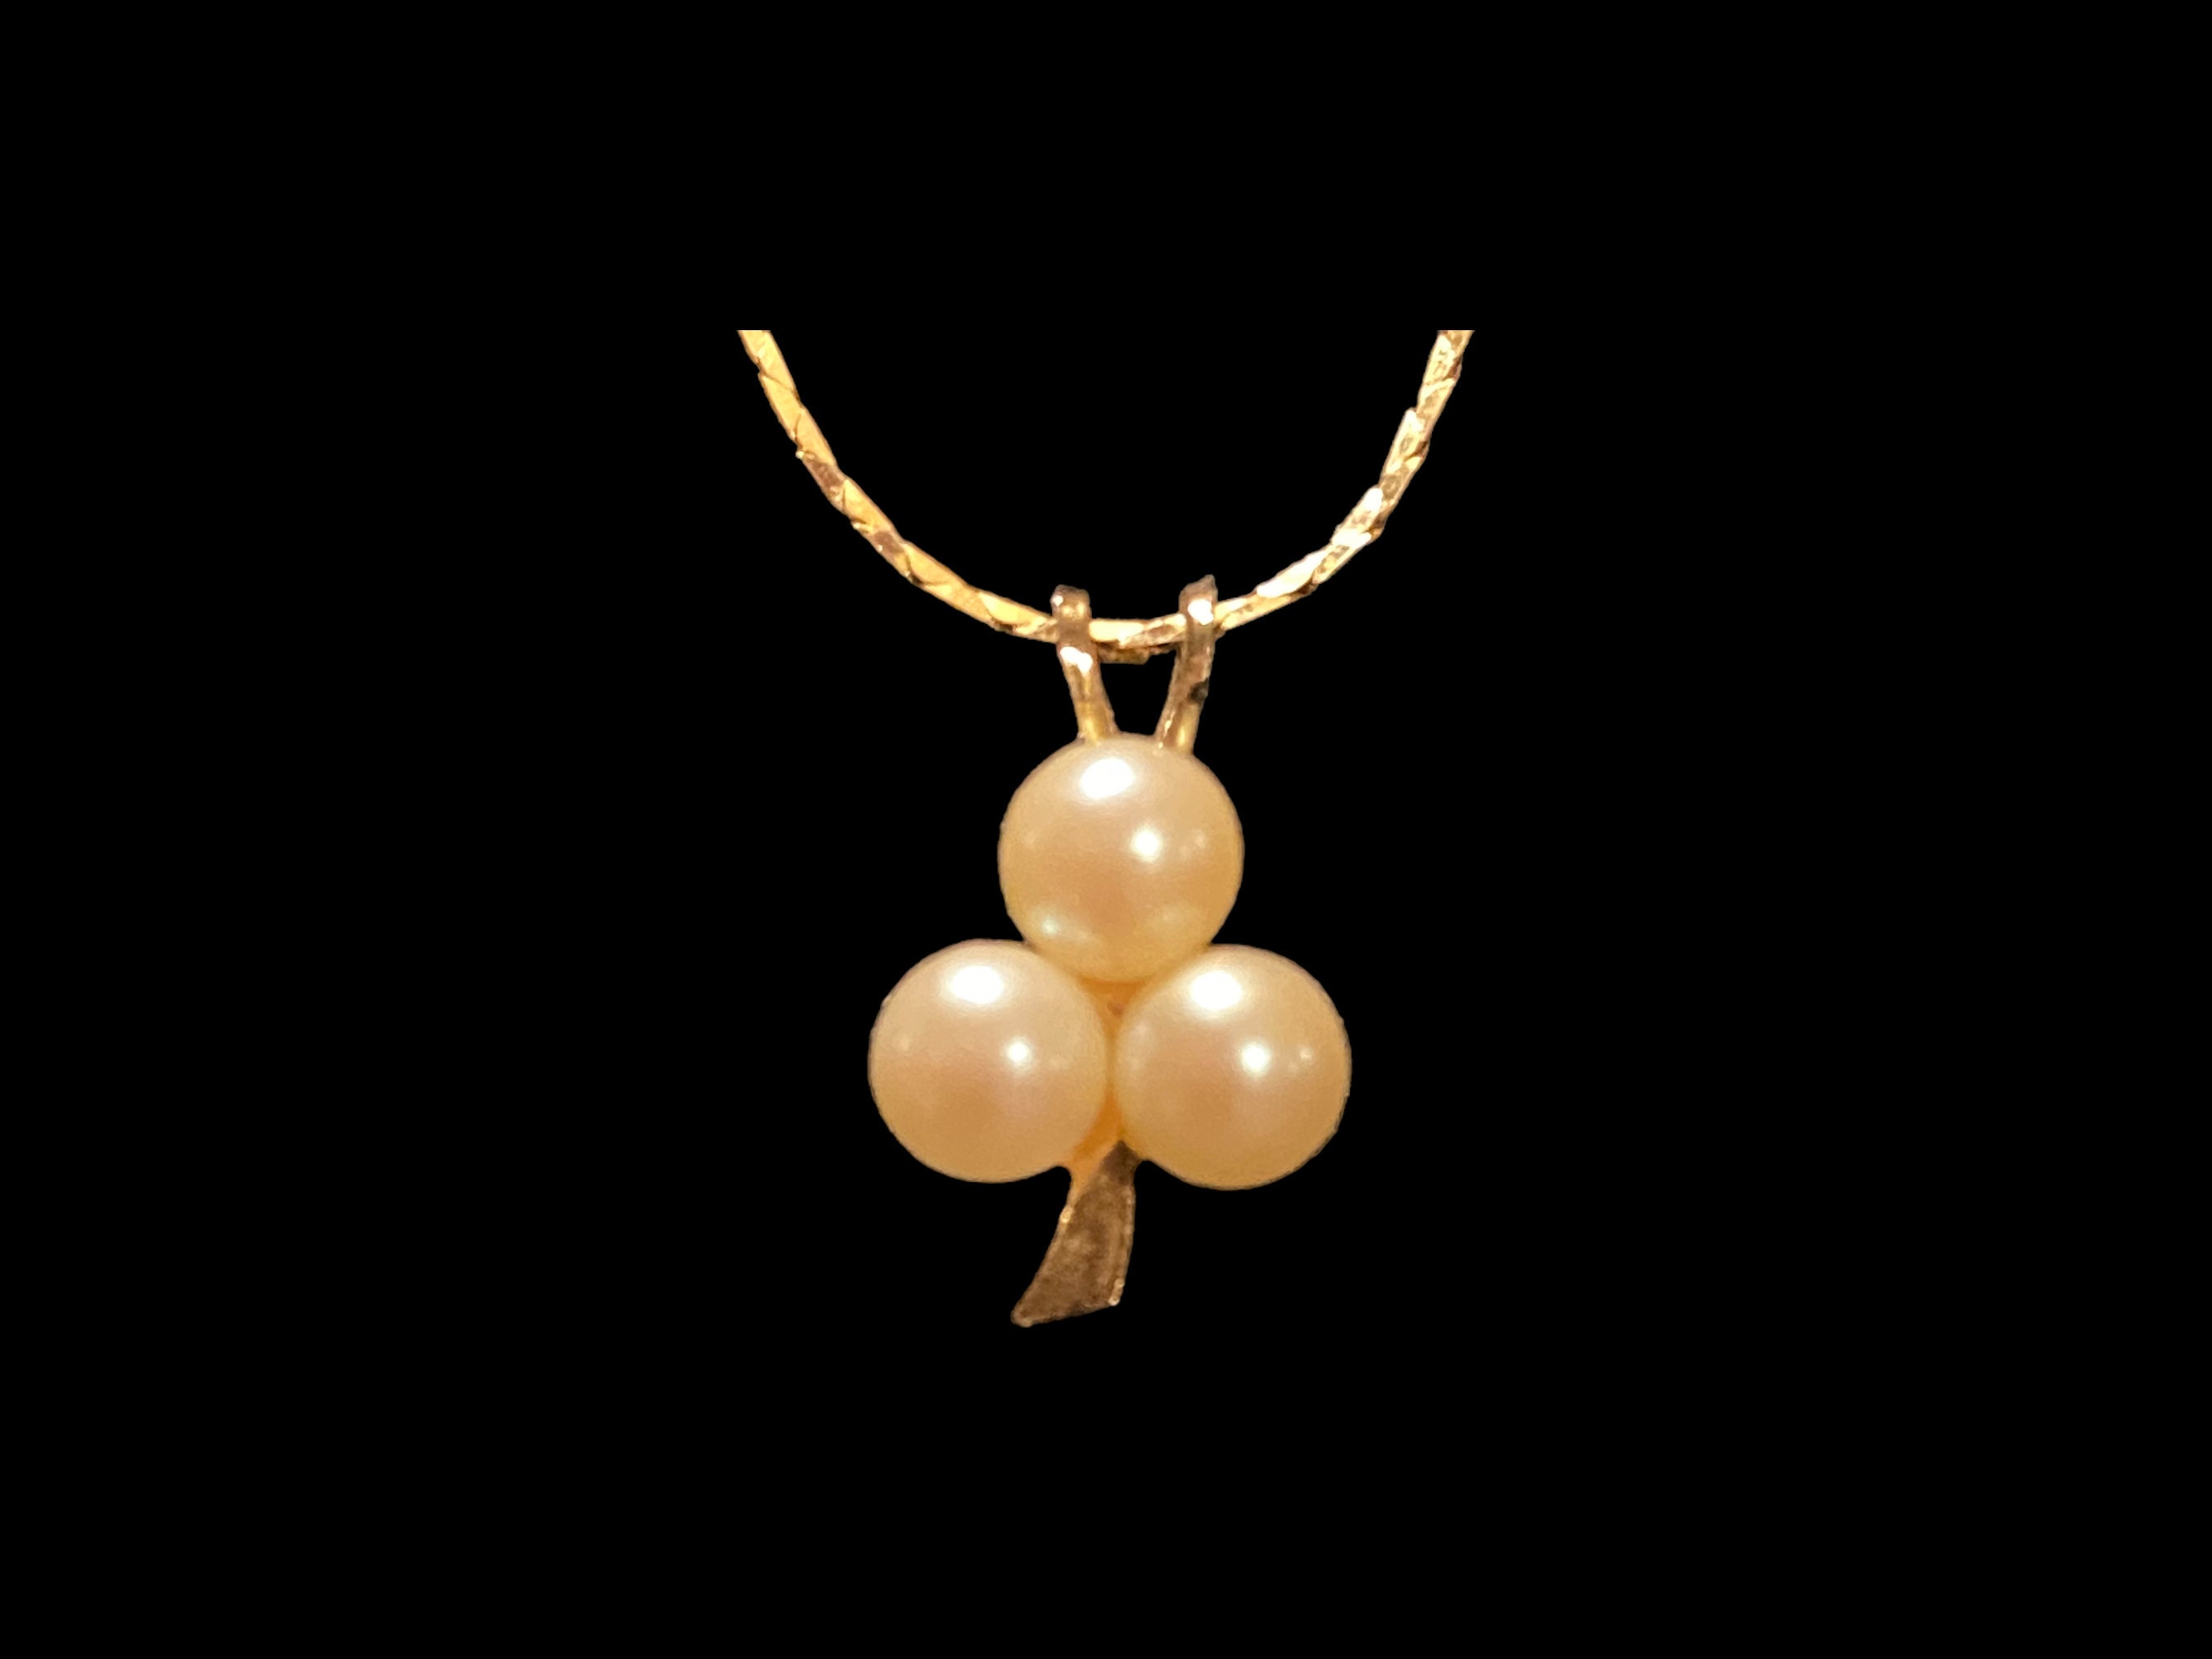 Limited Edition Pearl Necklace with Black Clover Design – Beady